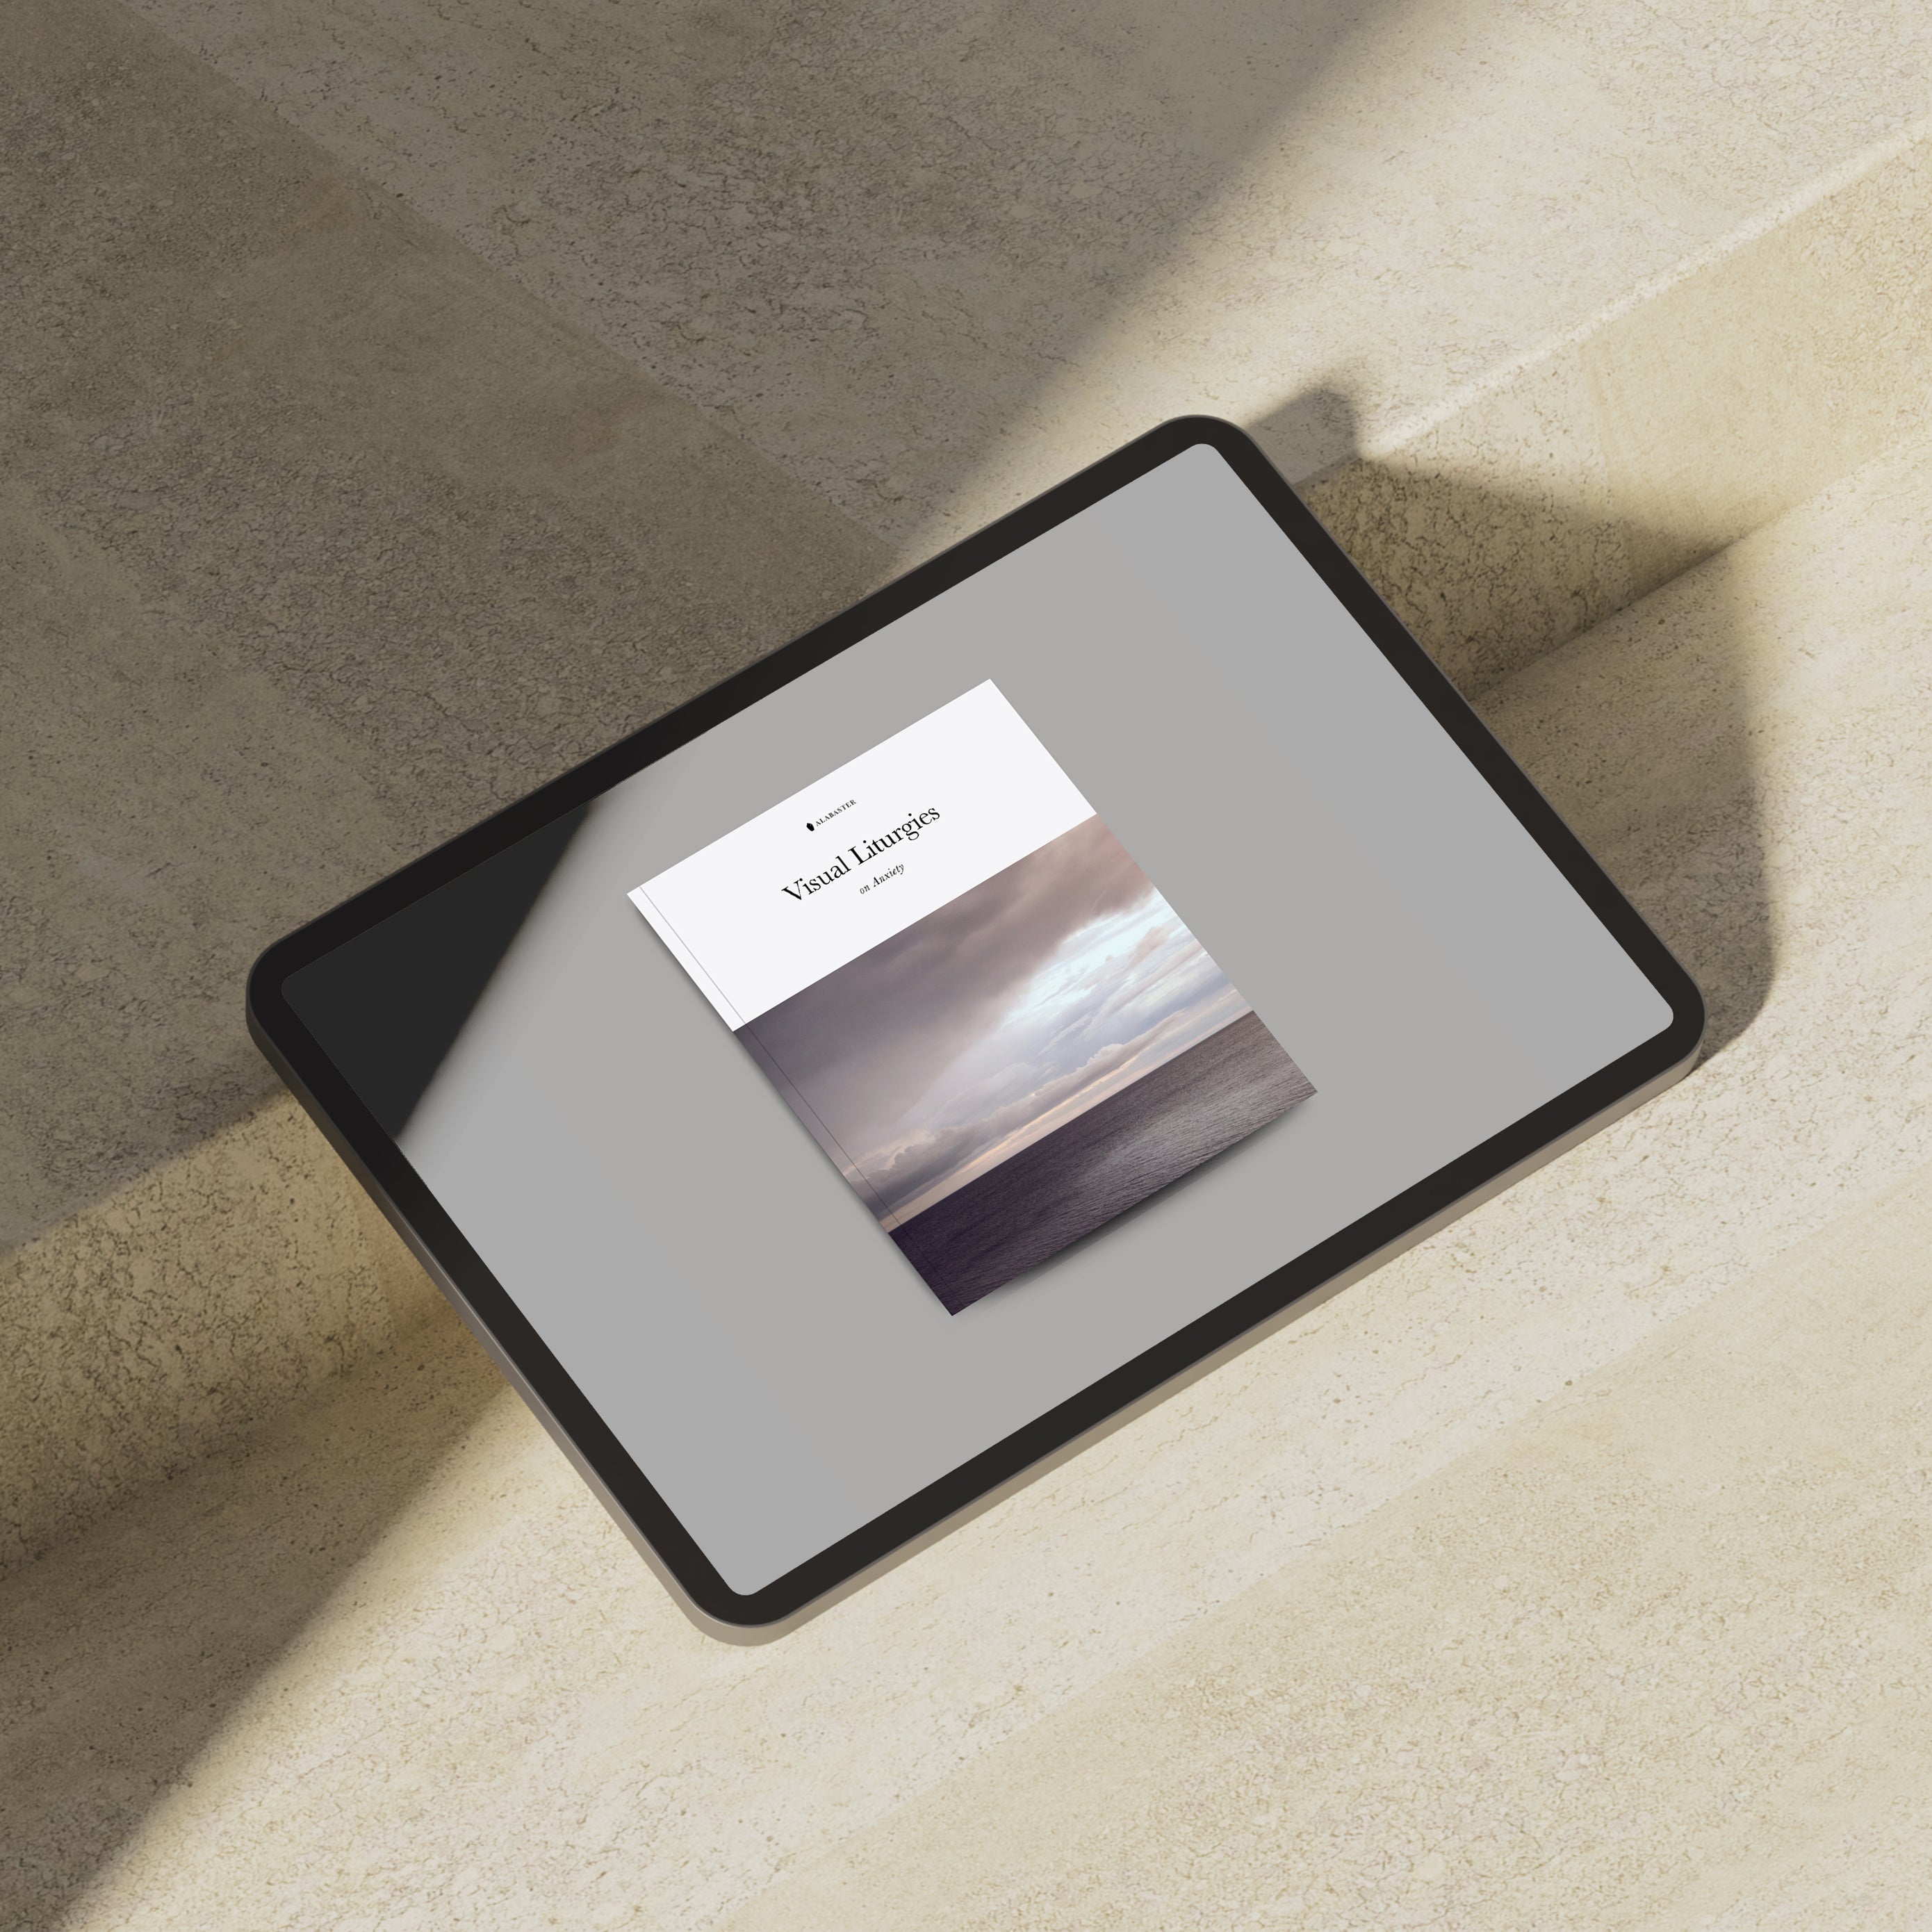 mock up of an ipad leaning against a step